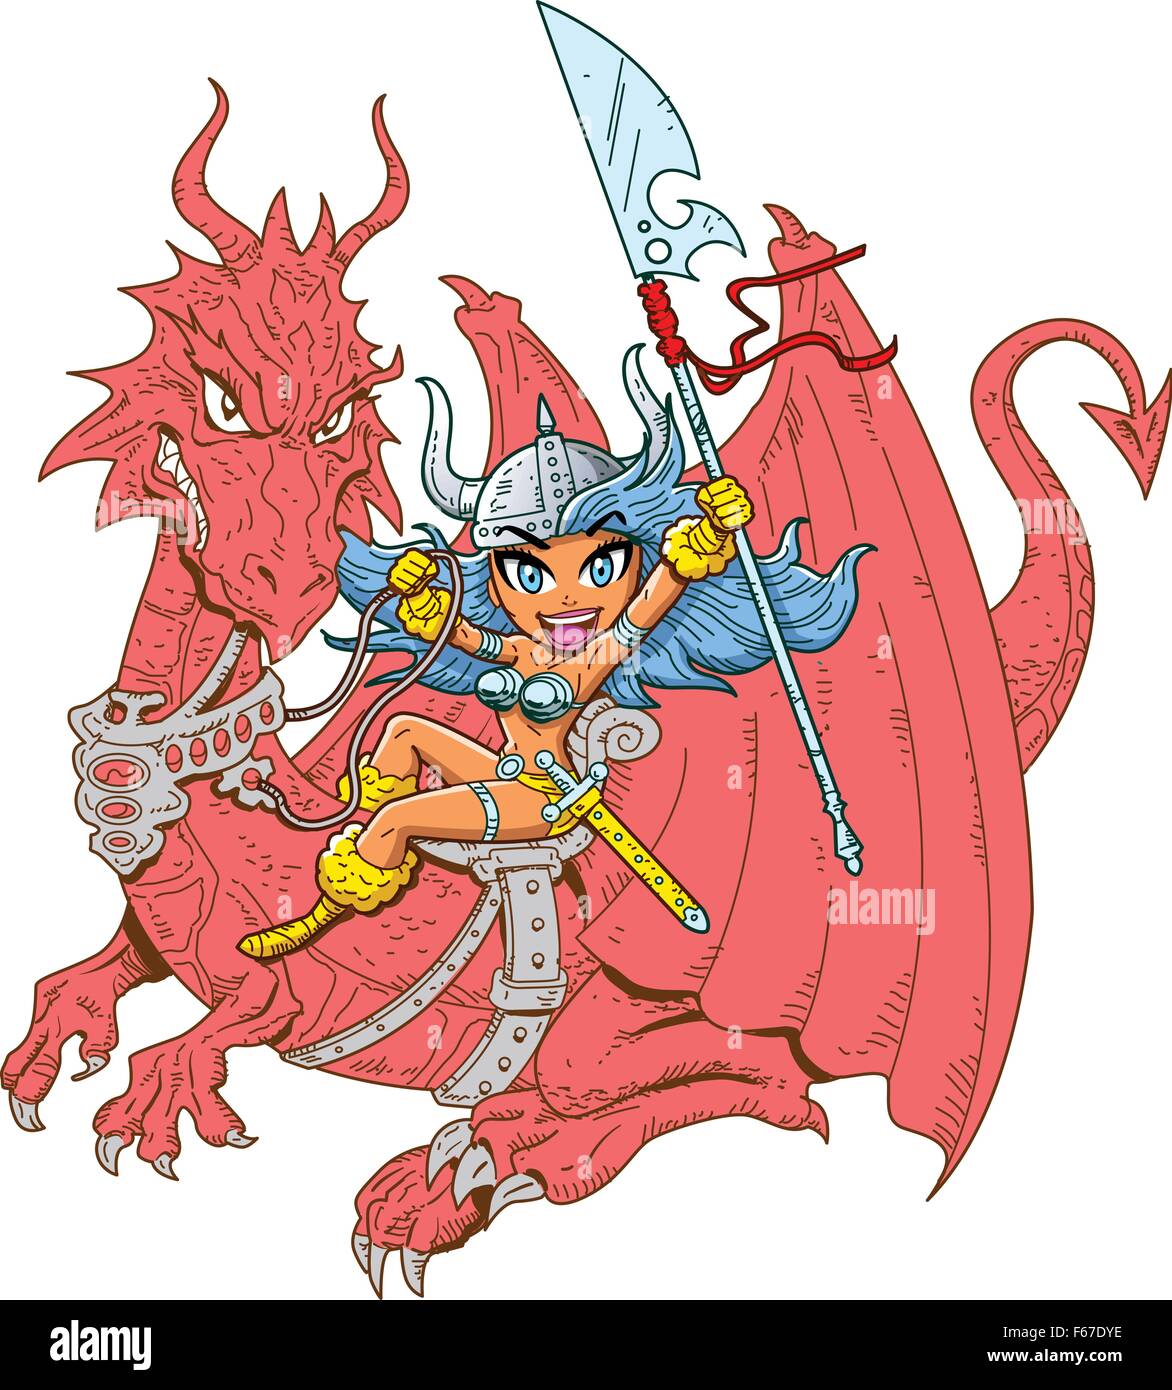 Mythical Girl Dragon Rider with Sword and Spear Stock Vector